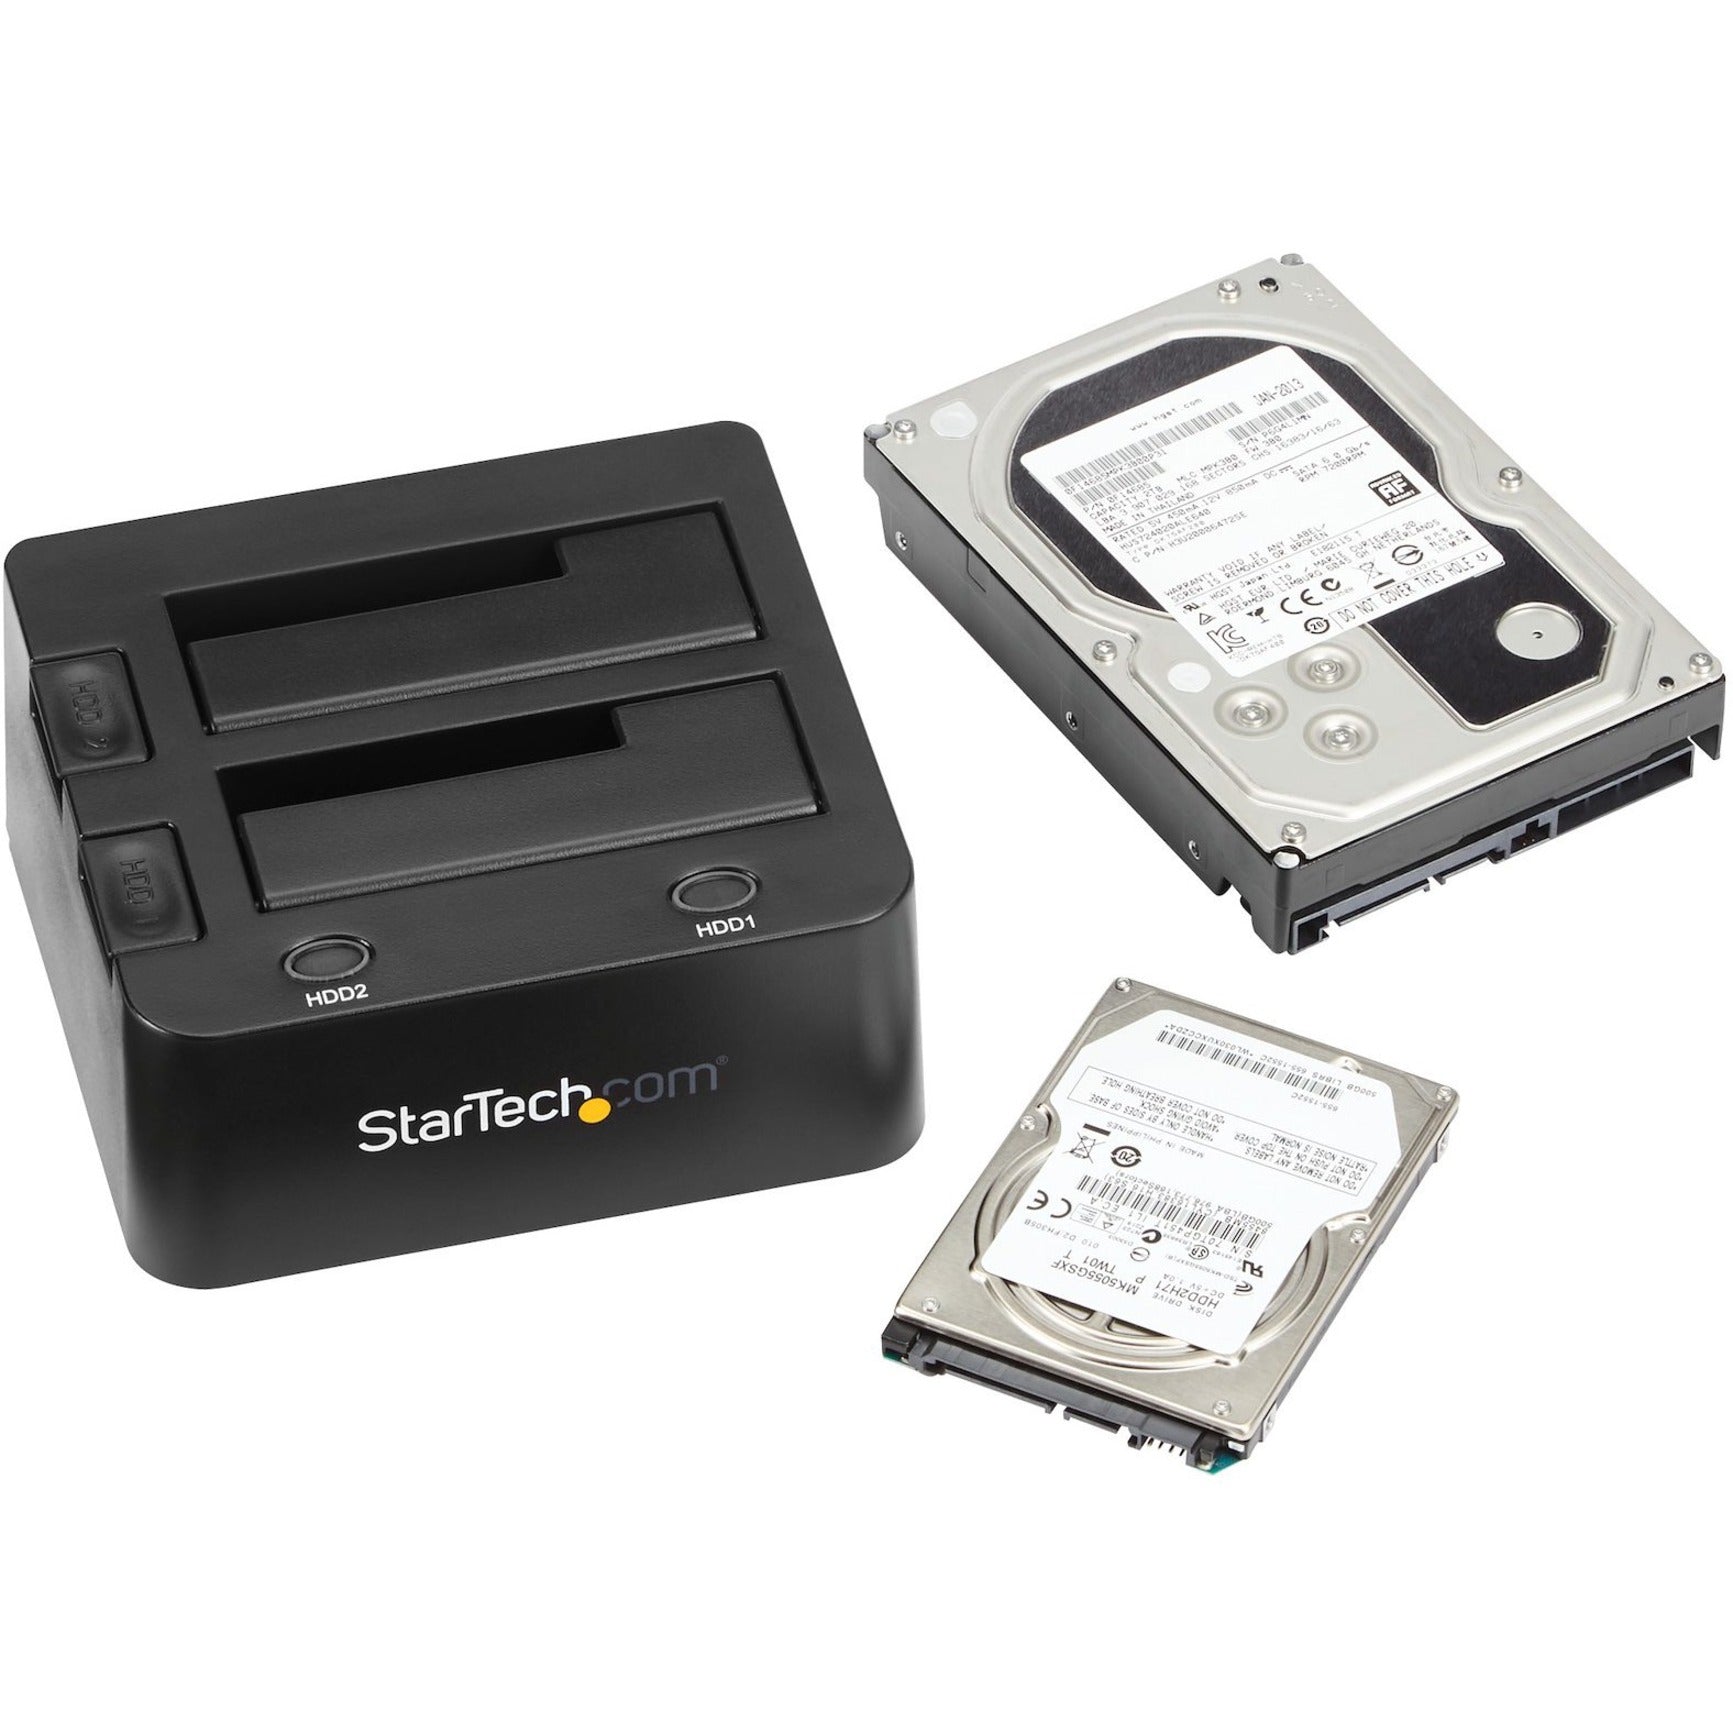 StarTech.com SDOCK2U33 USB3 Dual HD Dock with UASP for 2.5/3.5in SSD SATA 6Gbps, Easy Hard Drive Docking Station